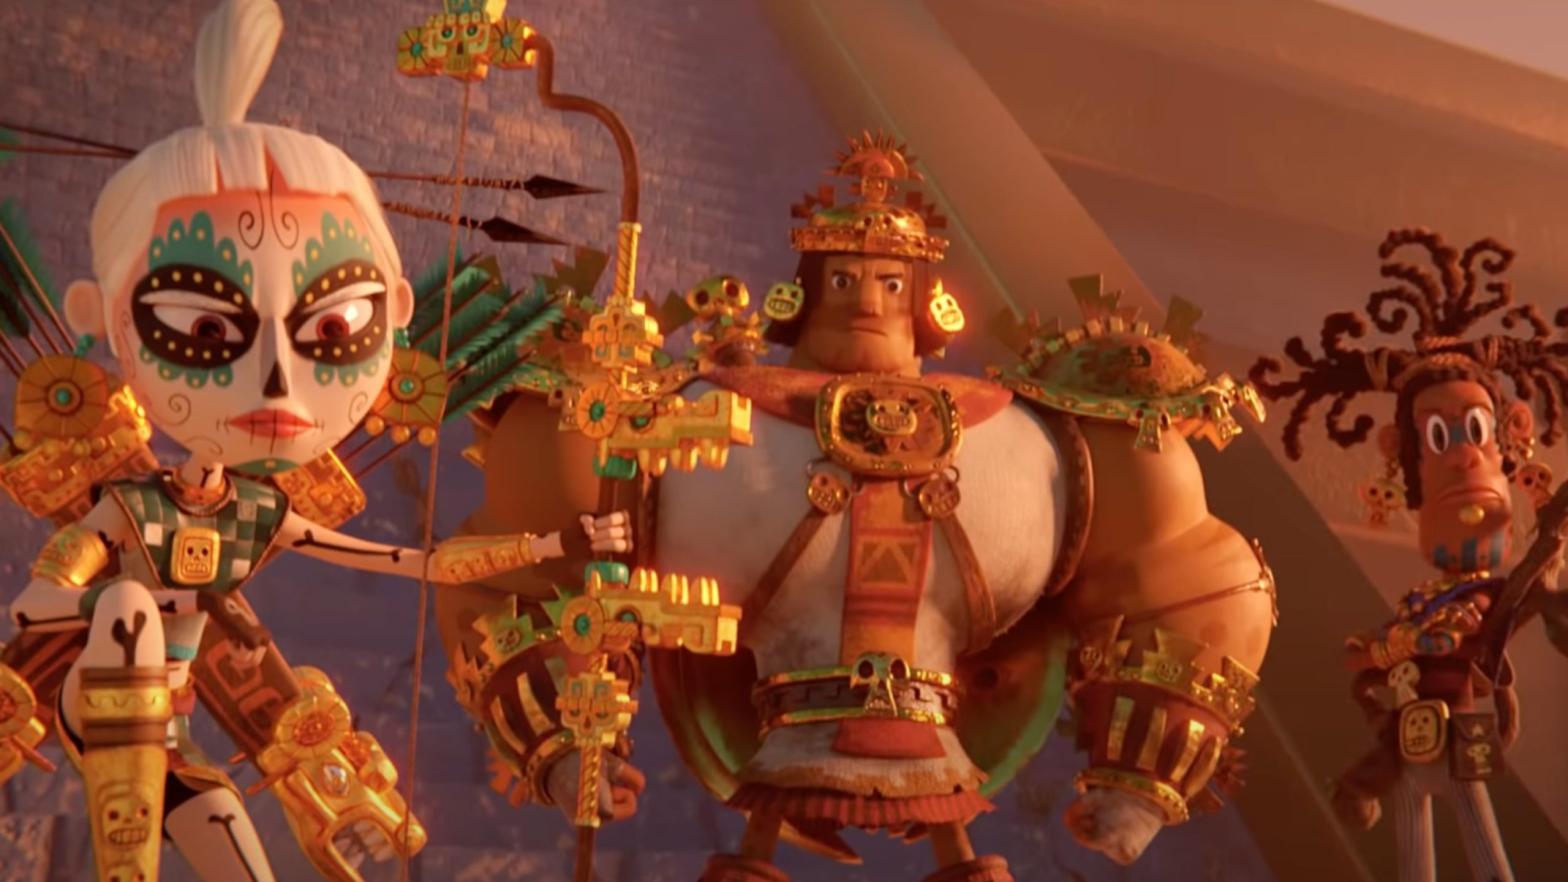 From left to right: Chimi the Skull Warrior, Picchu the Puma Barbarian, and Rico the Rooster Wizard. (Screenshot: Netflix)